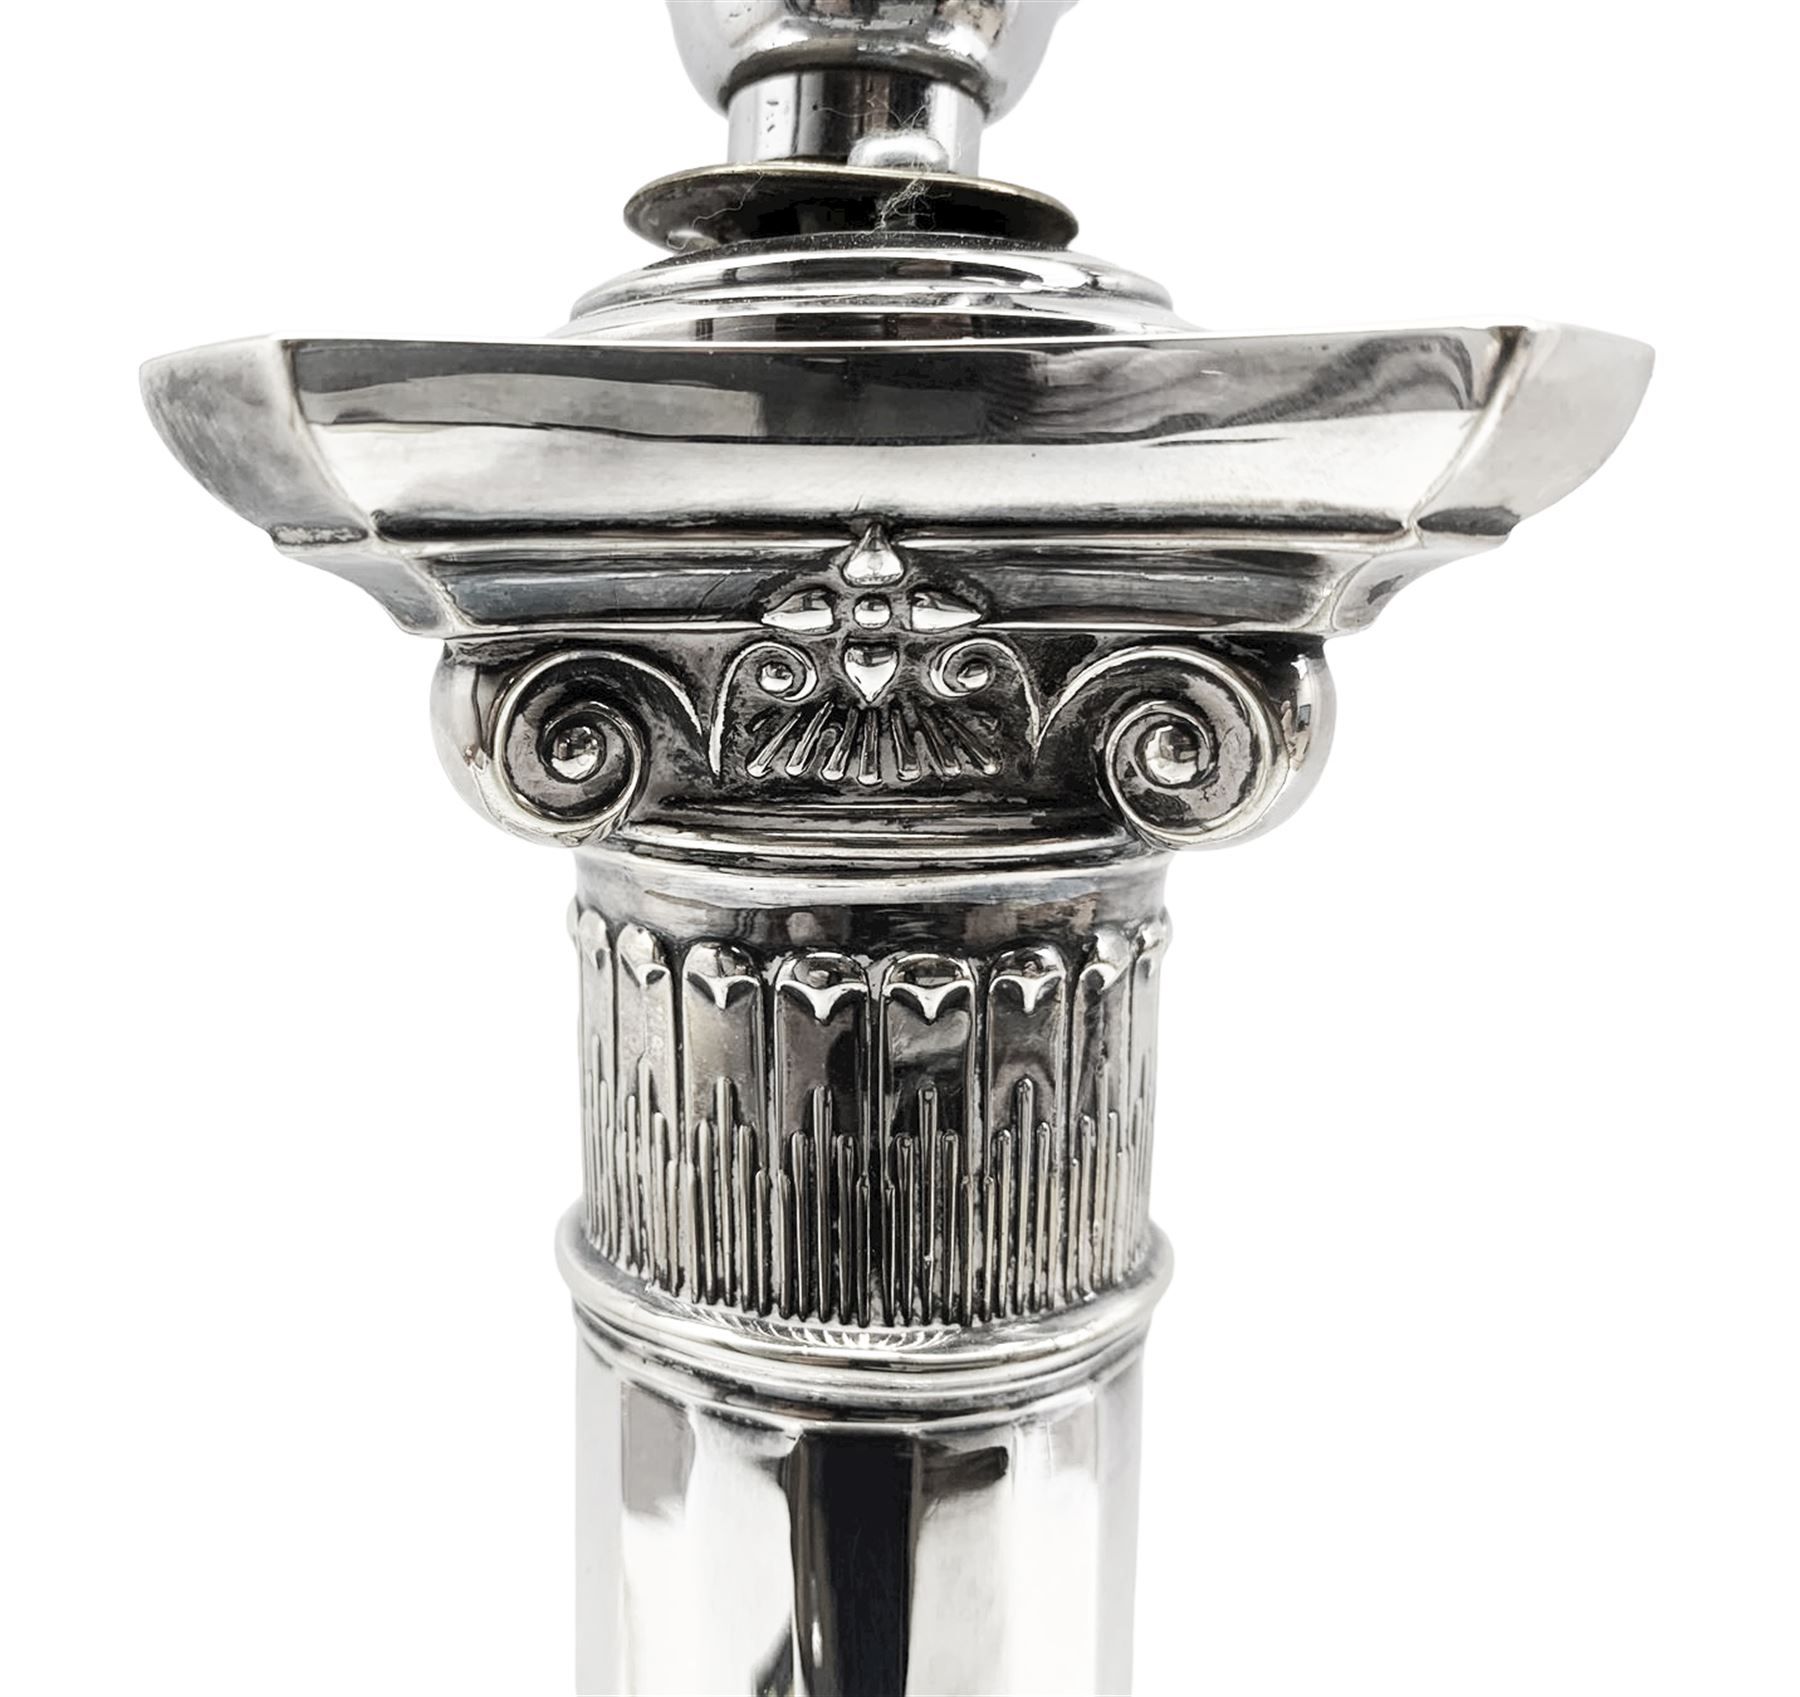 Edwardian silver-plated Corinthian column table lamp - Image 5 of 5